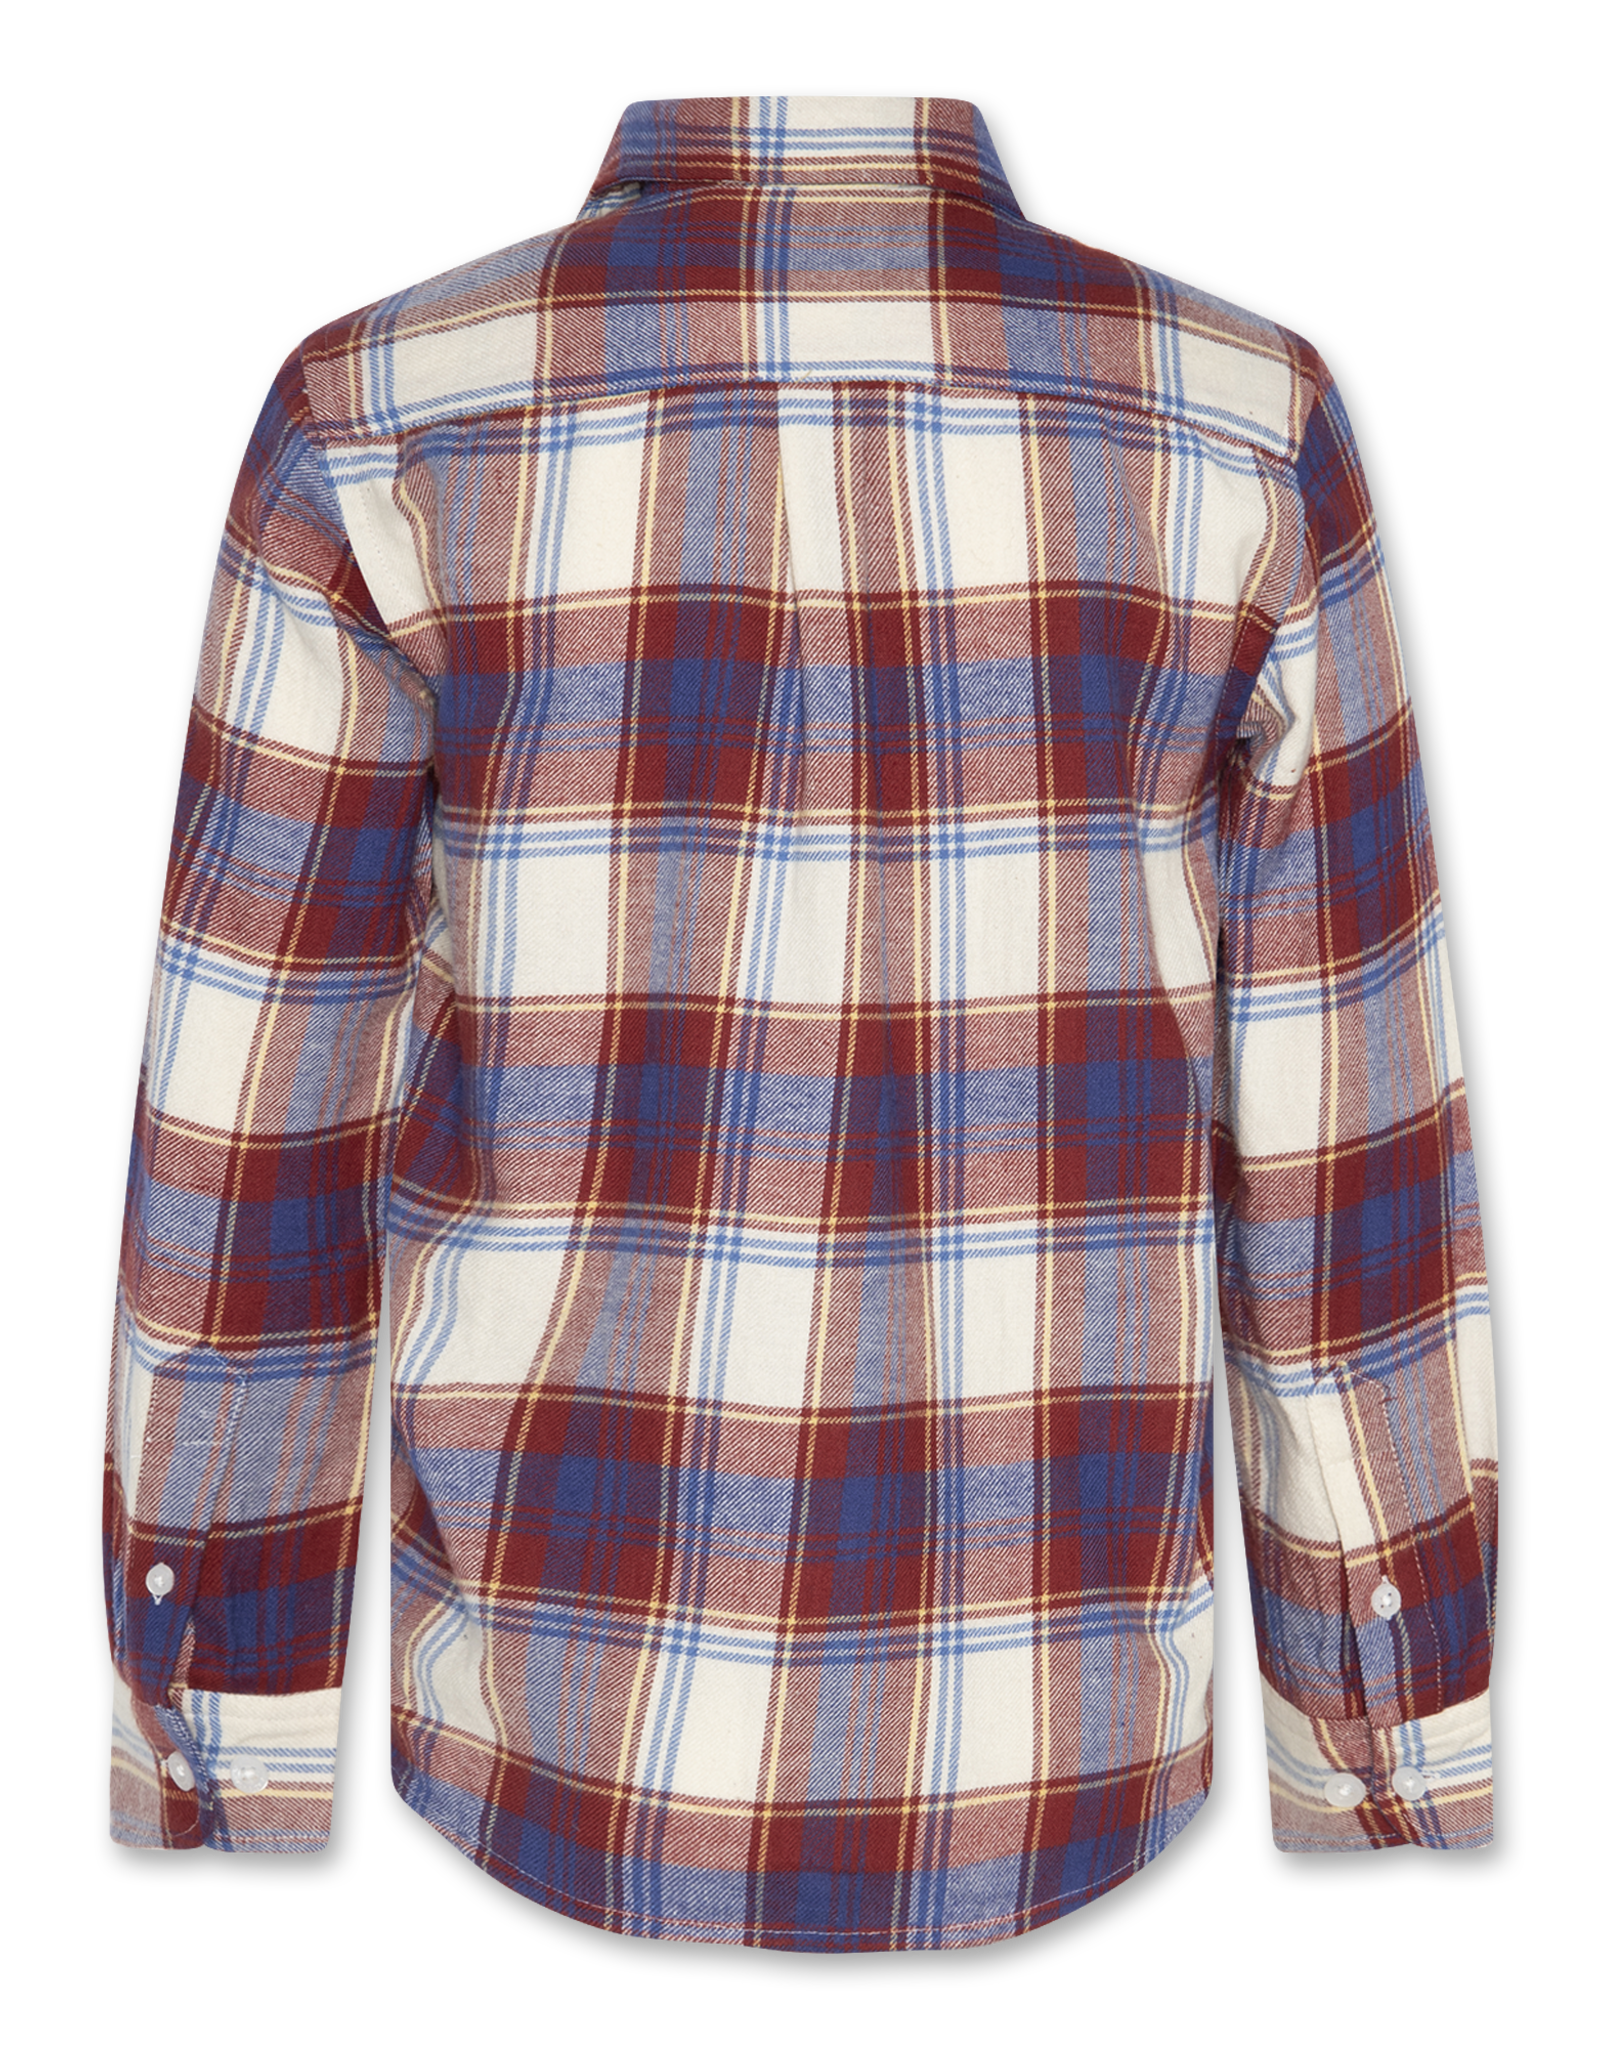 AMERICAN OUTFITTERS Ao76 Tim shirt red check